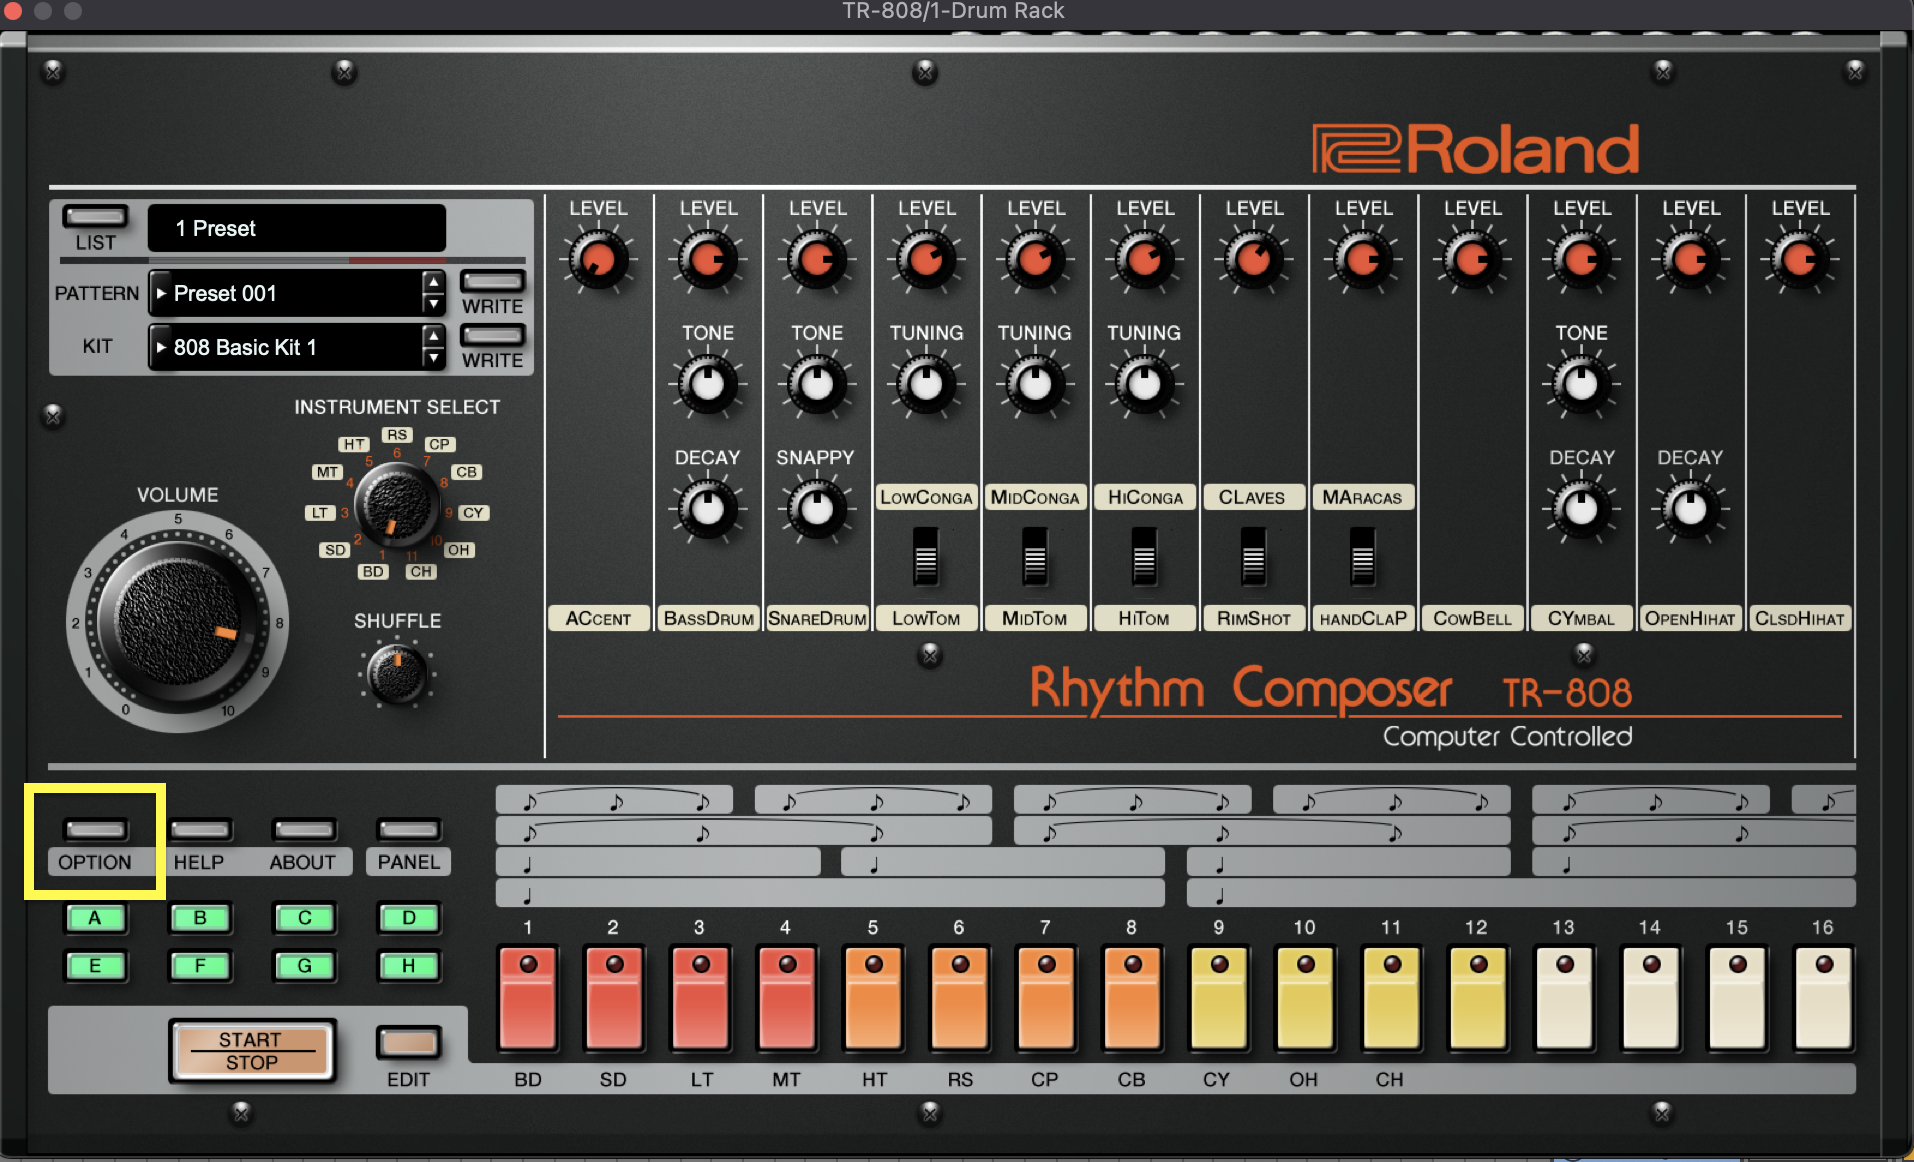 TR-808 graphical user interface